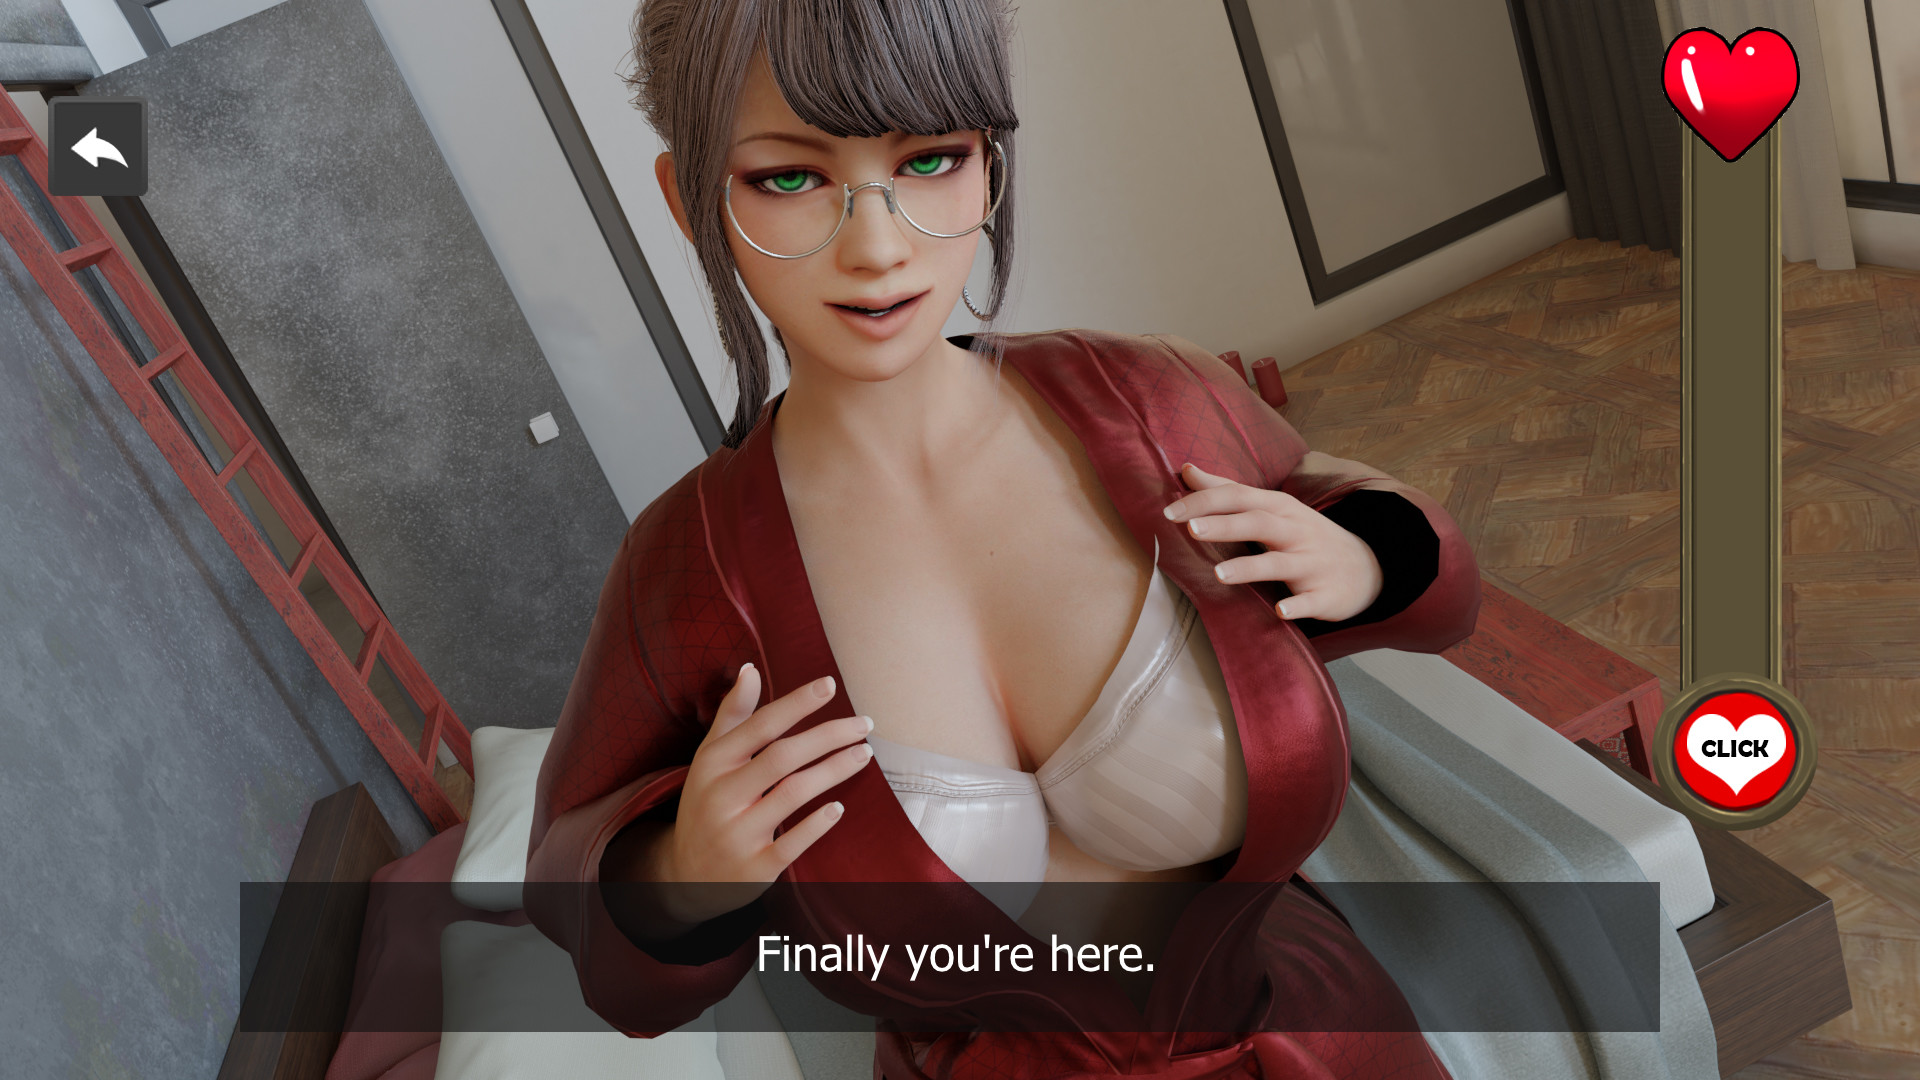 Animated 3d porn games